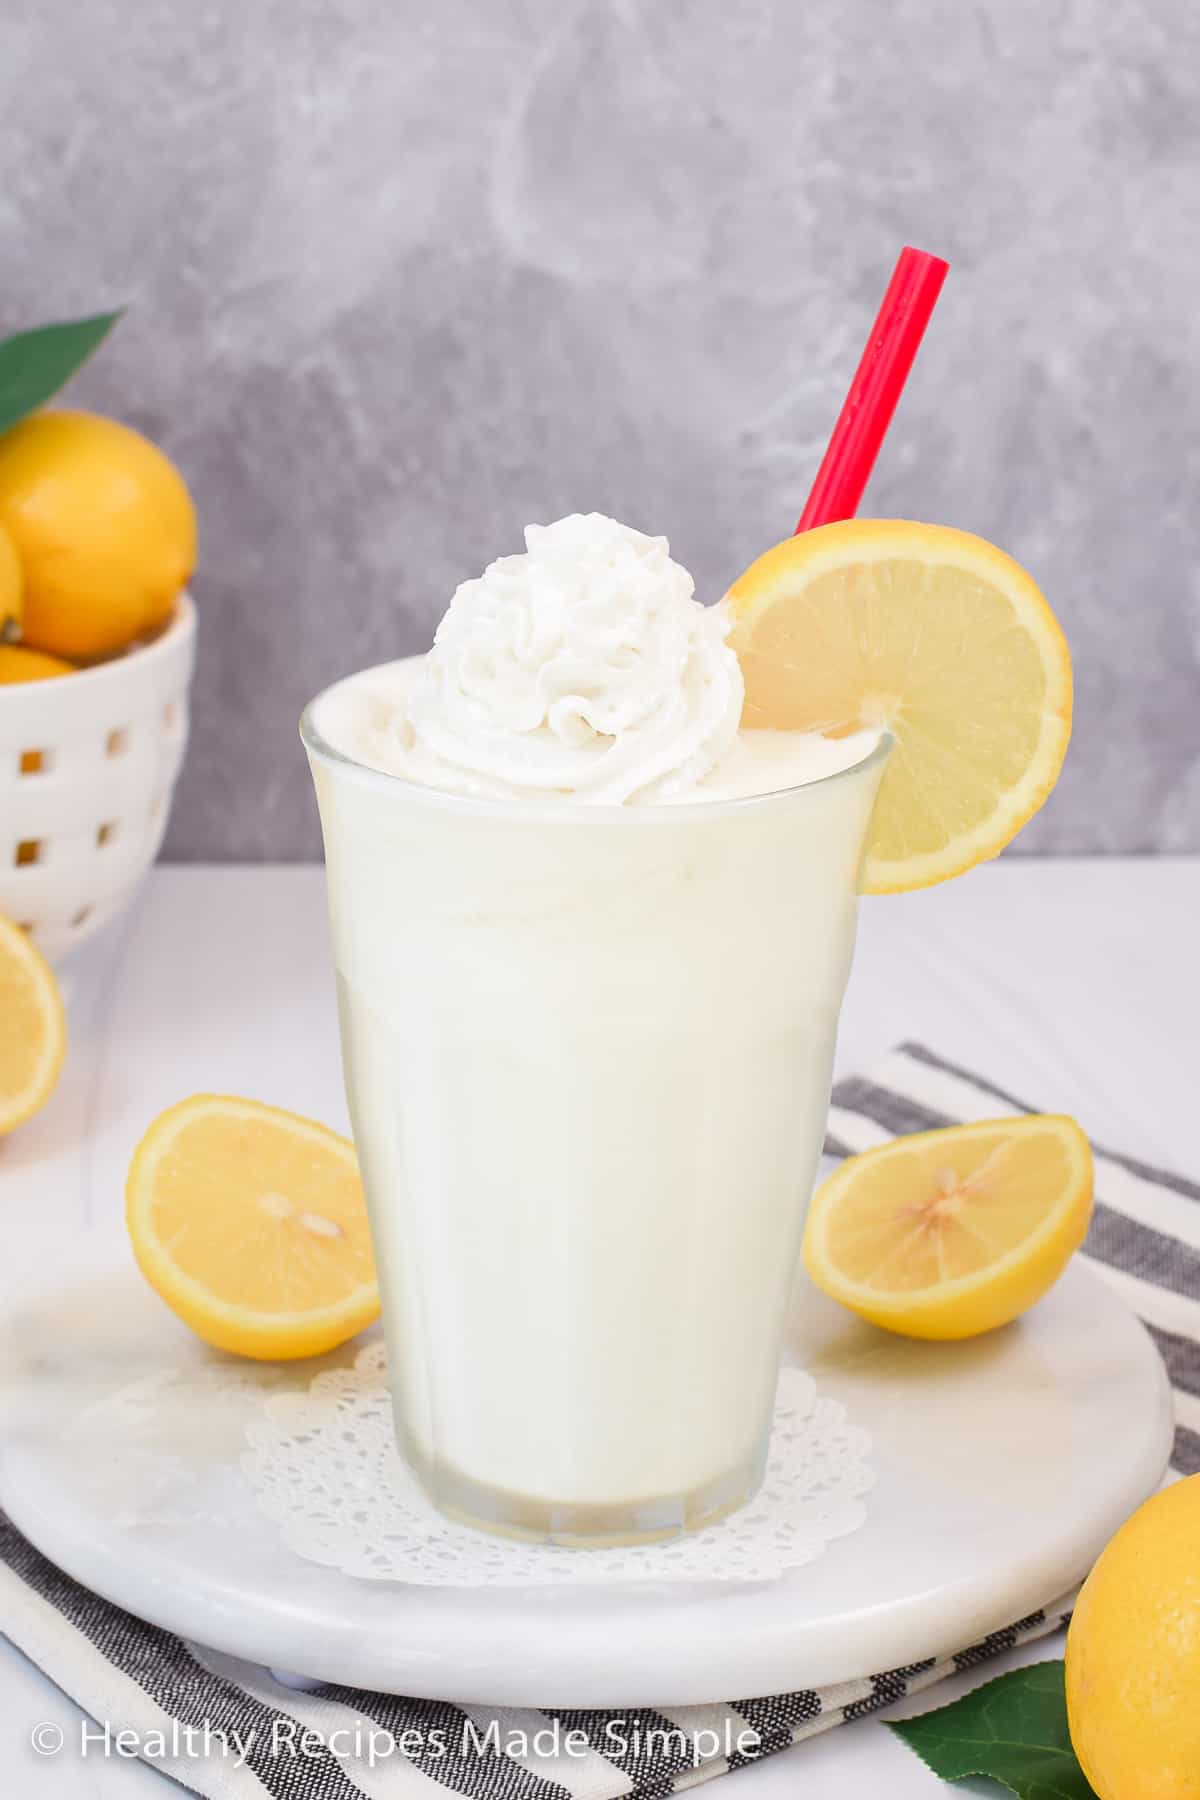 Lemon shake in a clear glass with lemons in the background.